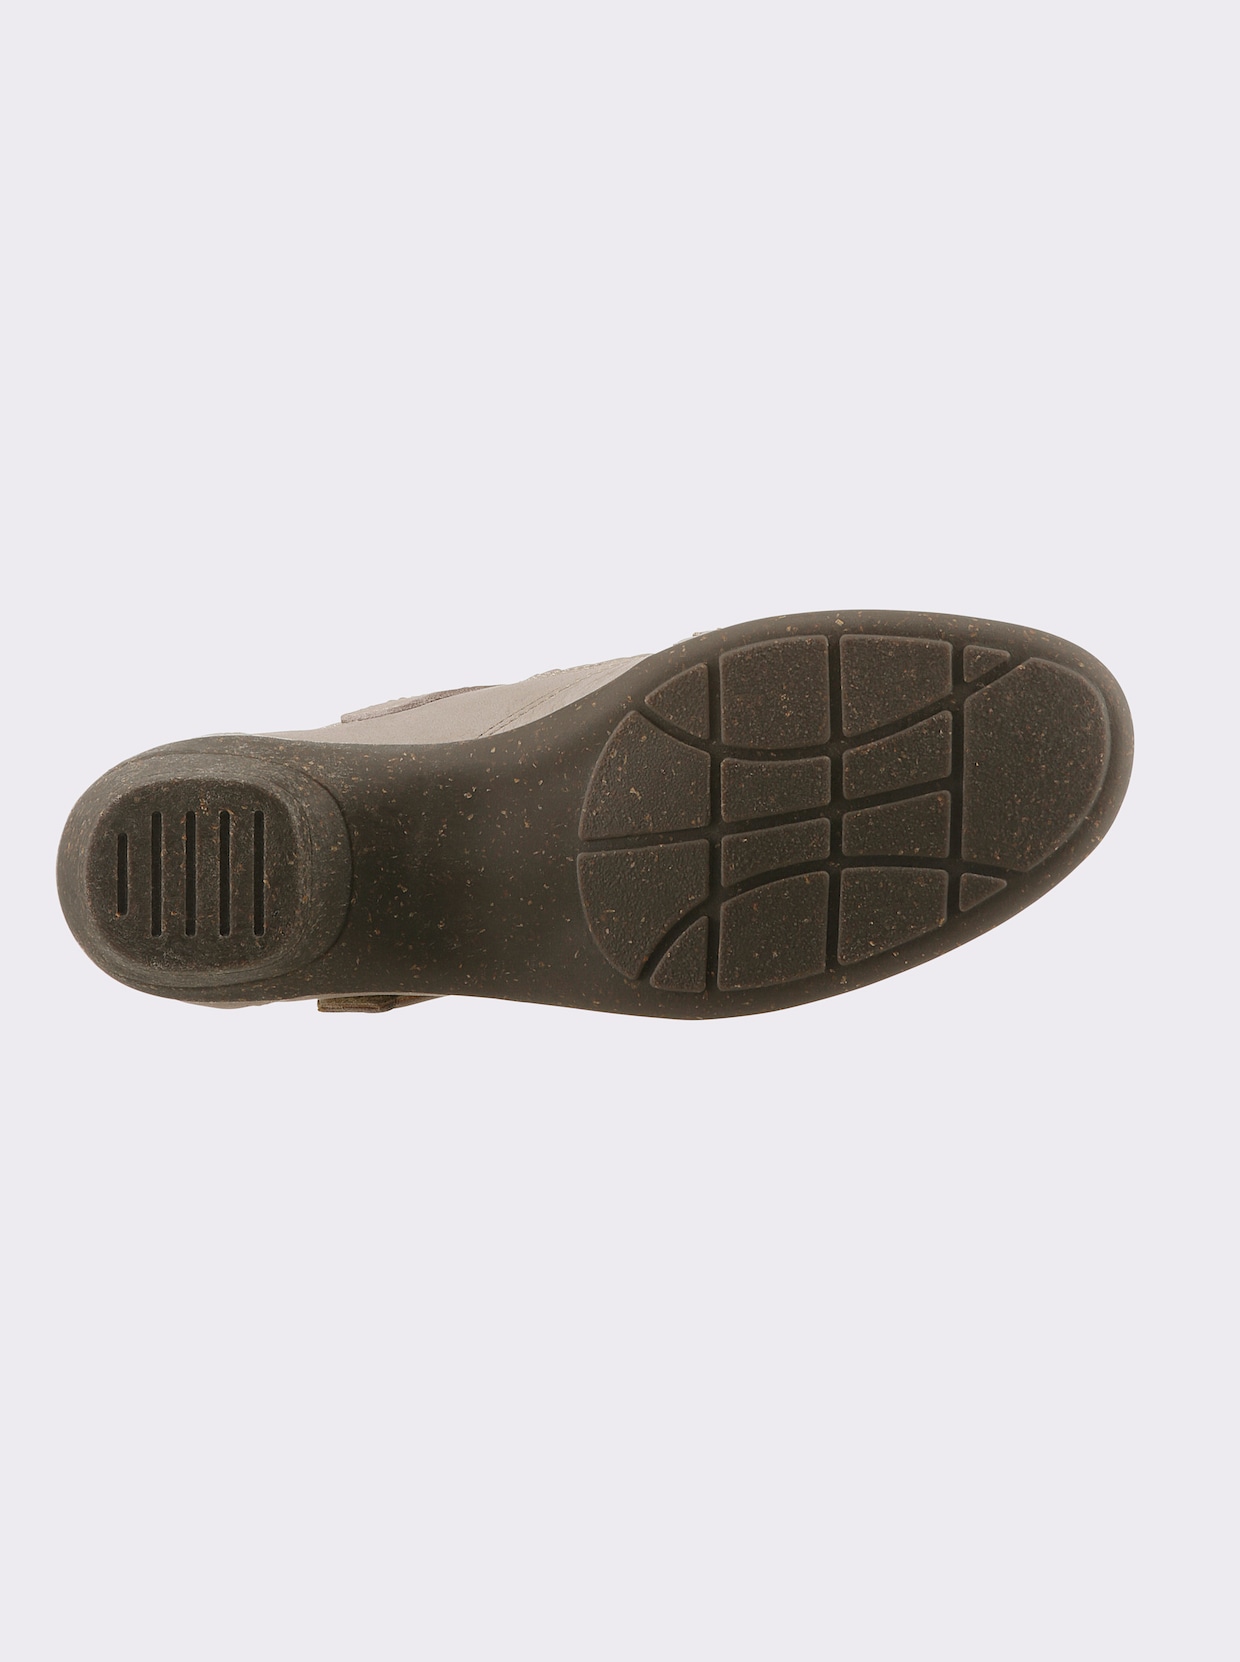 airsoft comfort+ Chaussures à bandes auto-agrippantes - taupe